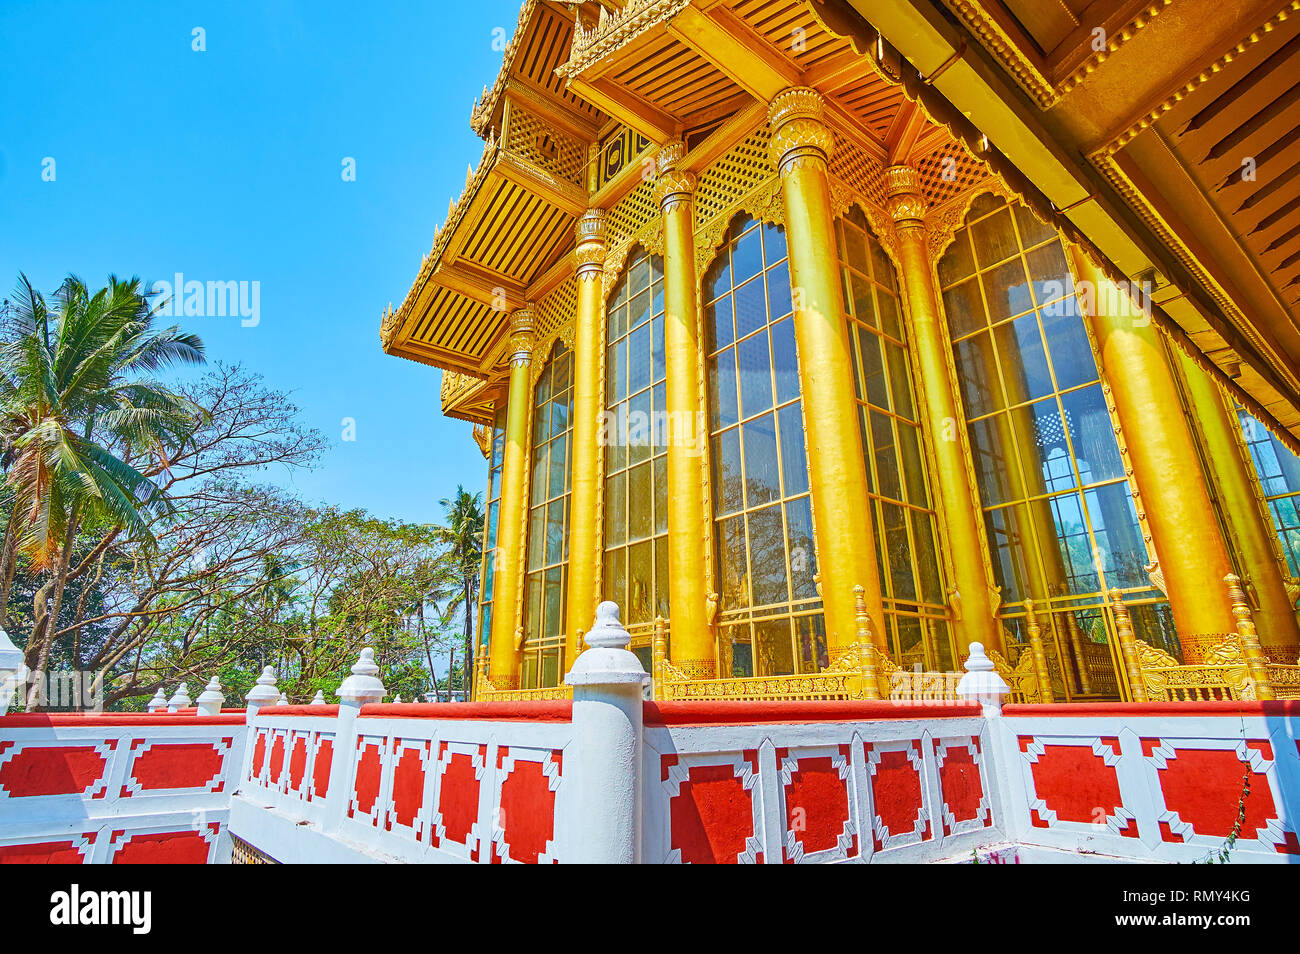 Details of exterior of Kanbawzathadi Golden palace with tall windows, streight pillars, fine carvings and gilding, Bago, Myanmar Stock Photo